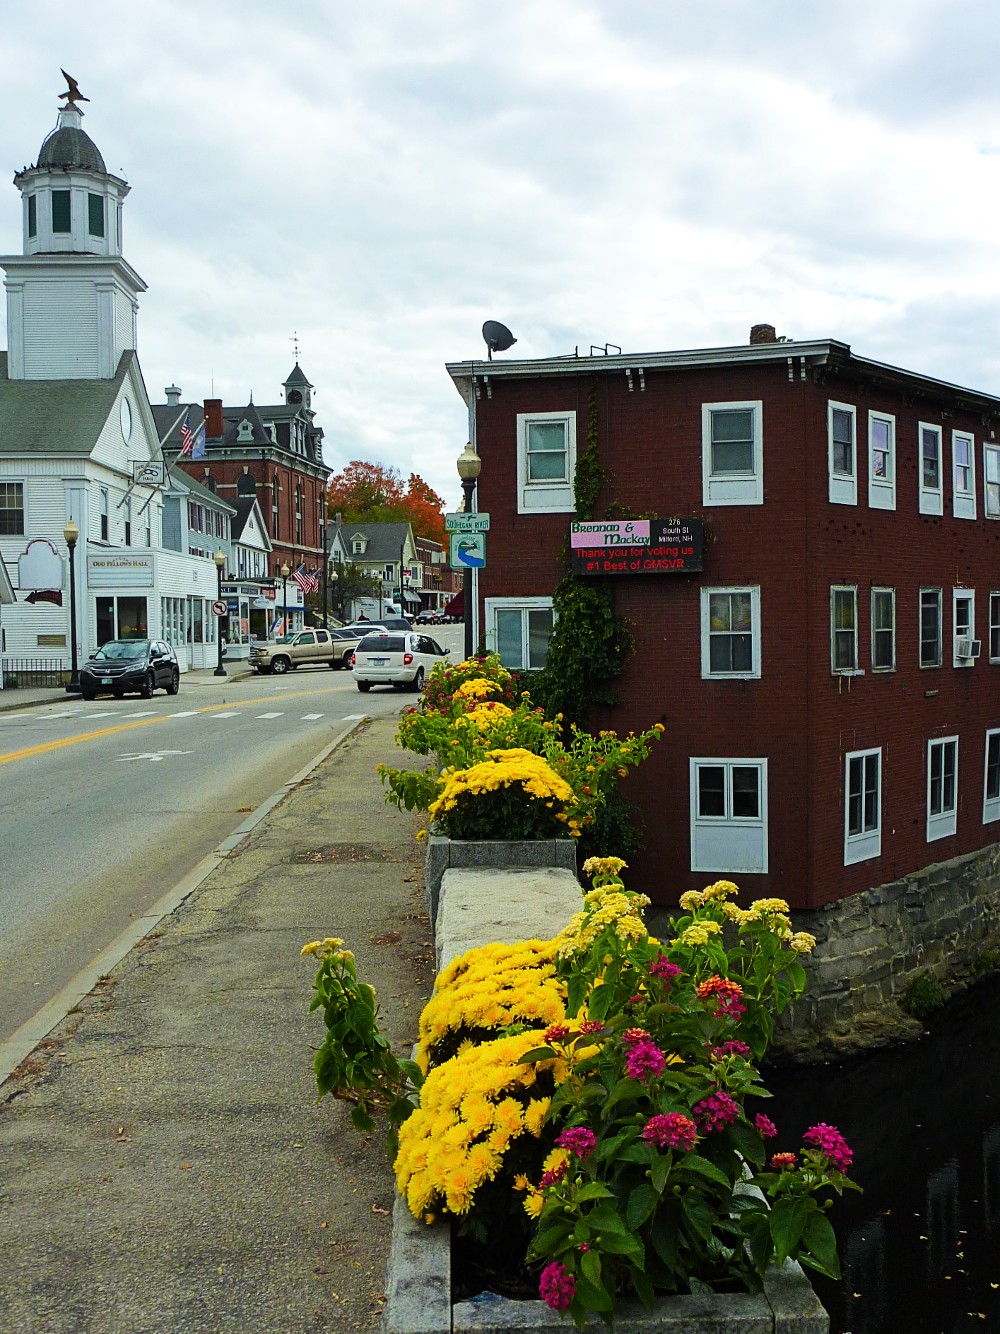 Approaching downtown Milford, NH.